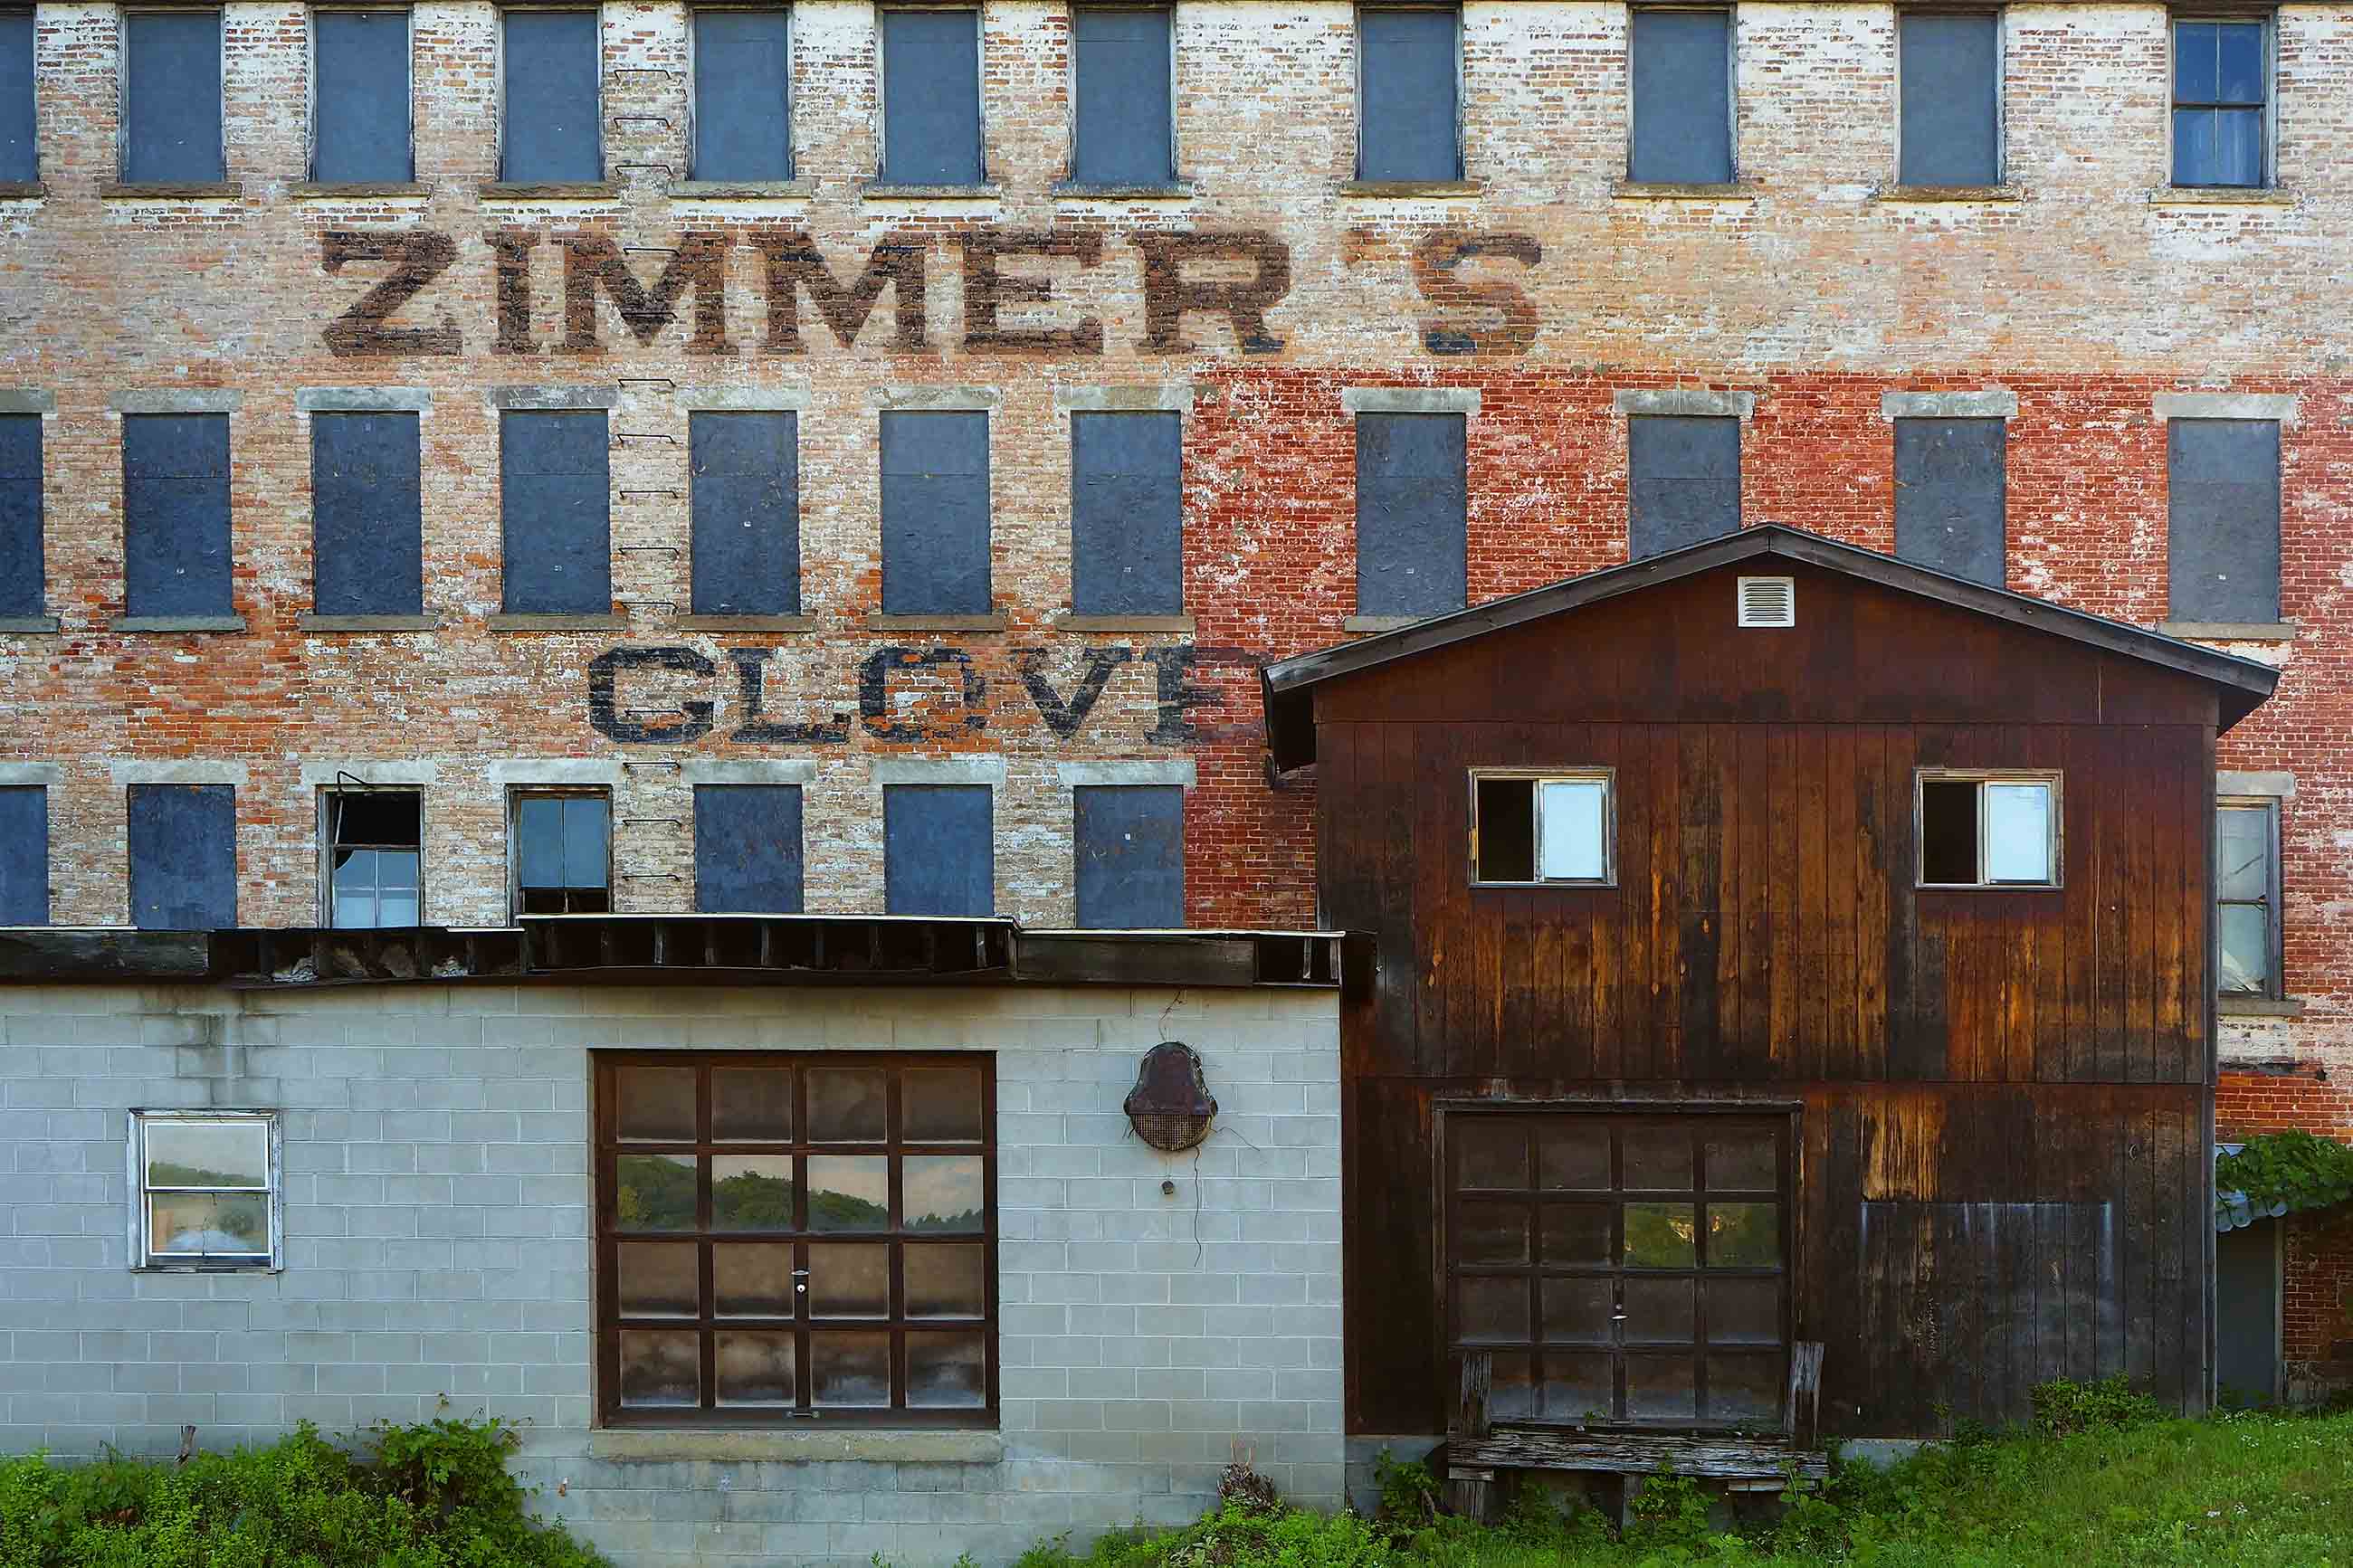 The ruins of the Zimmer and Son glove factory on South Arlington Avenue have become a Gloversville, New York, landmark. For more than 100 years, leather-tanning and glove-making propelled the economy of the upstate New York town. Image by Larry C. Price. United States, 2016.